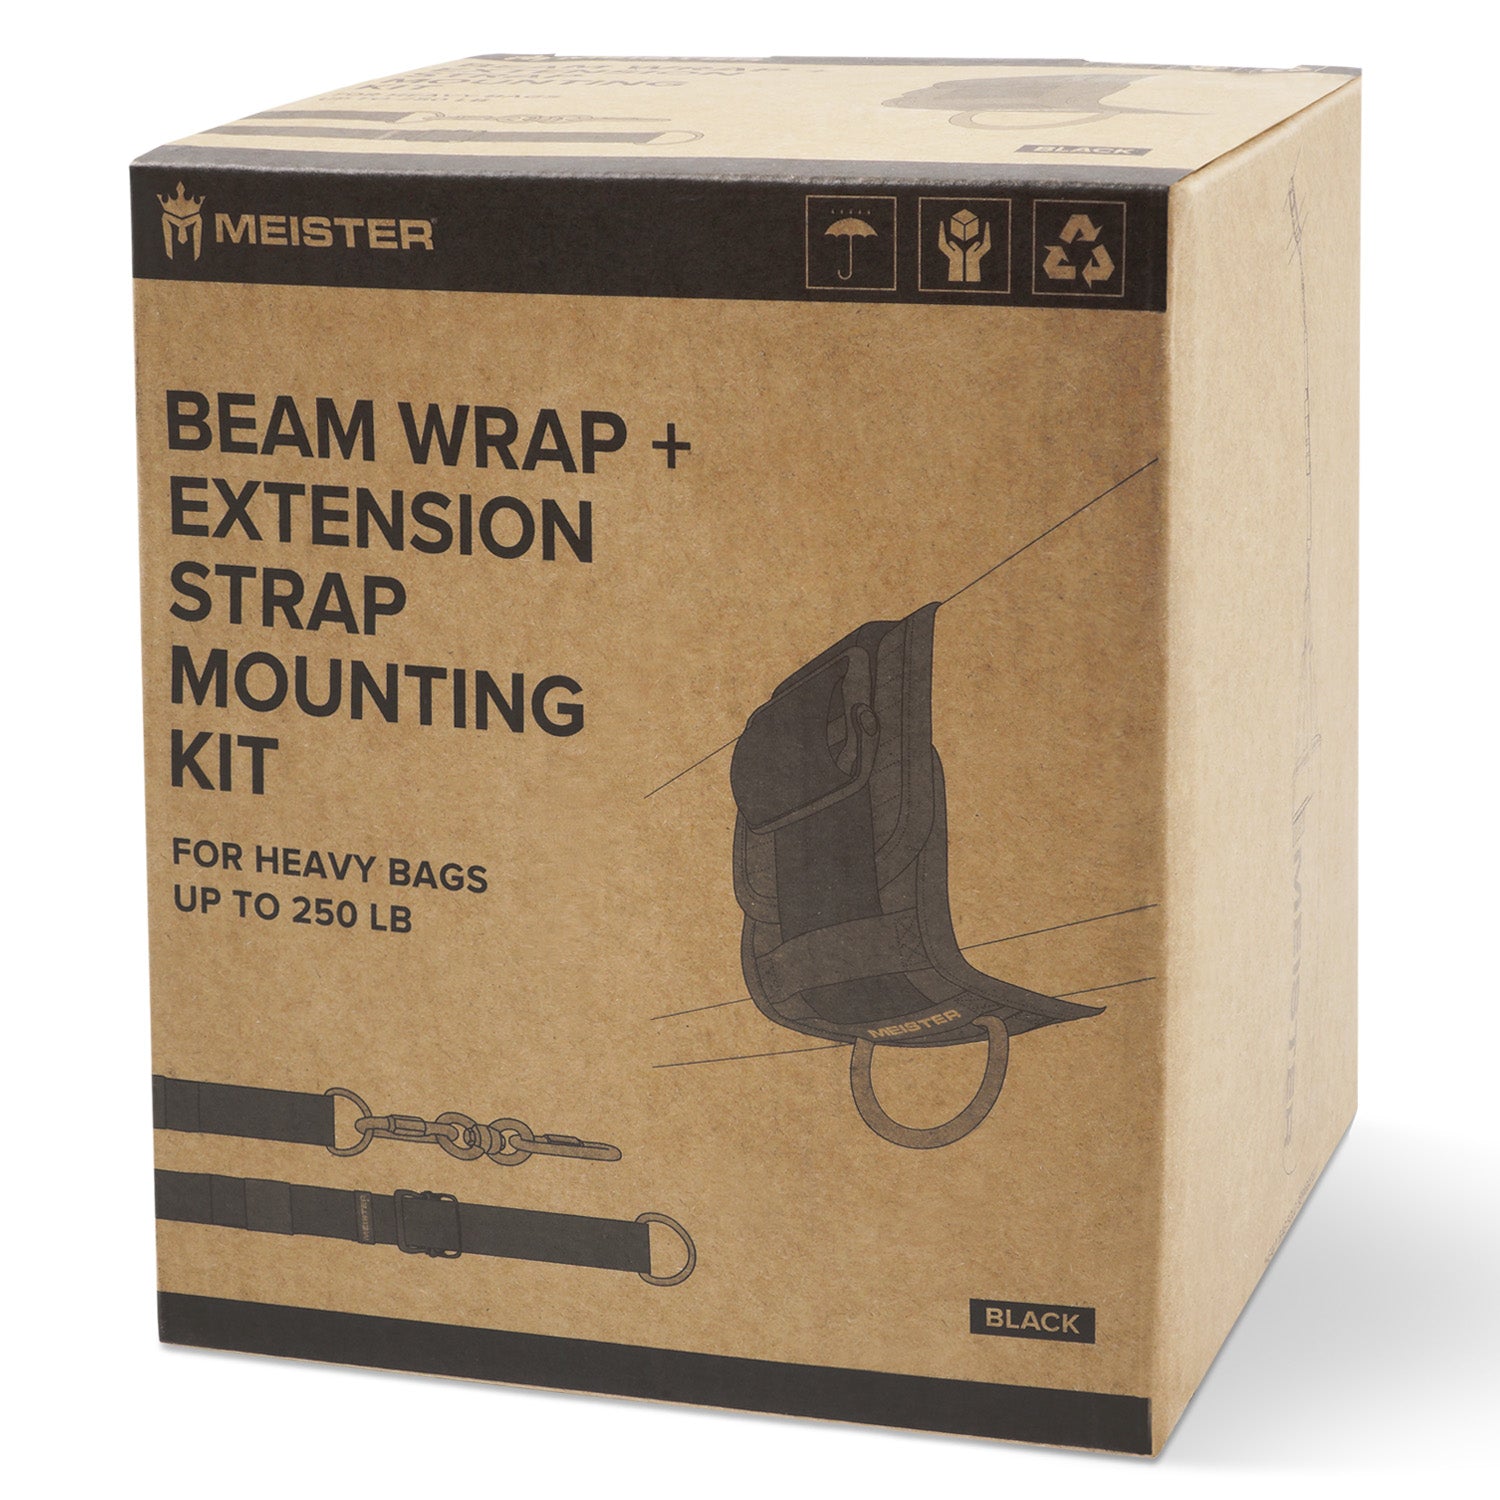 Meister Beam Wrap + Extension Strap Mounting Kit for Hanging Heavy Bags